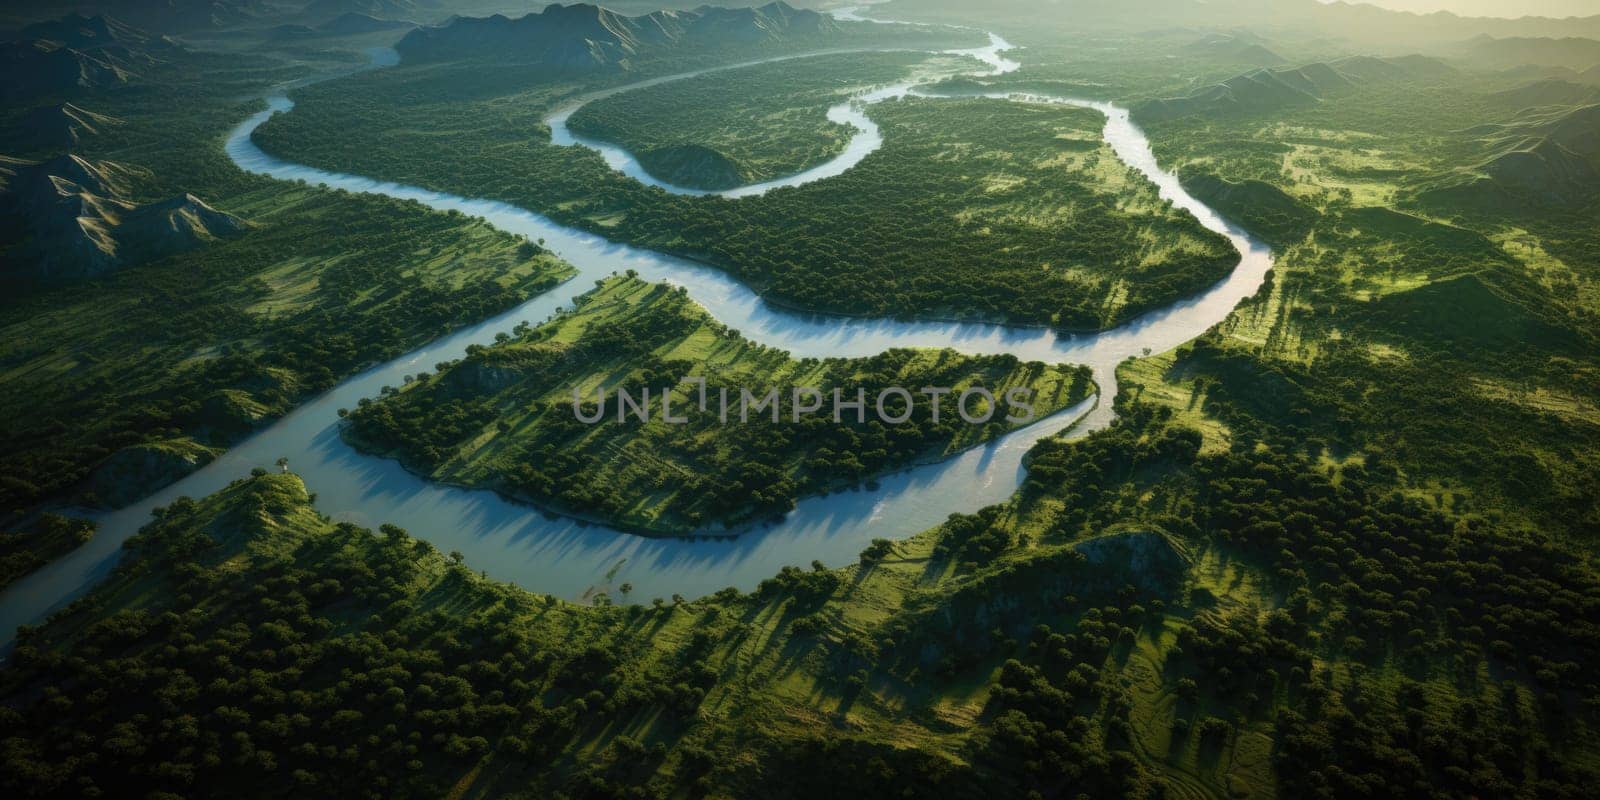 This aerial photograph captures the beauty of a river as it winds its way through a vibrant, green valley.